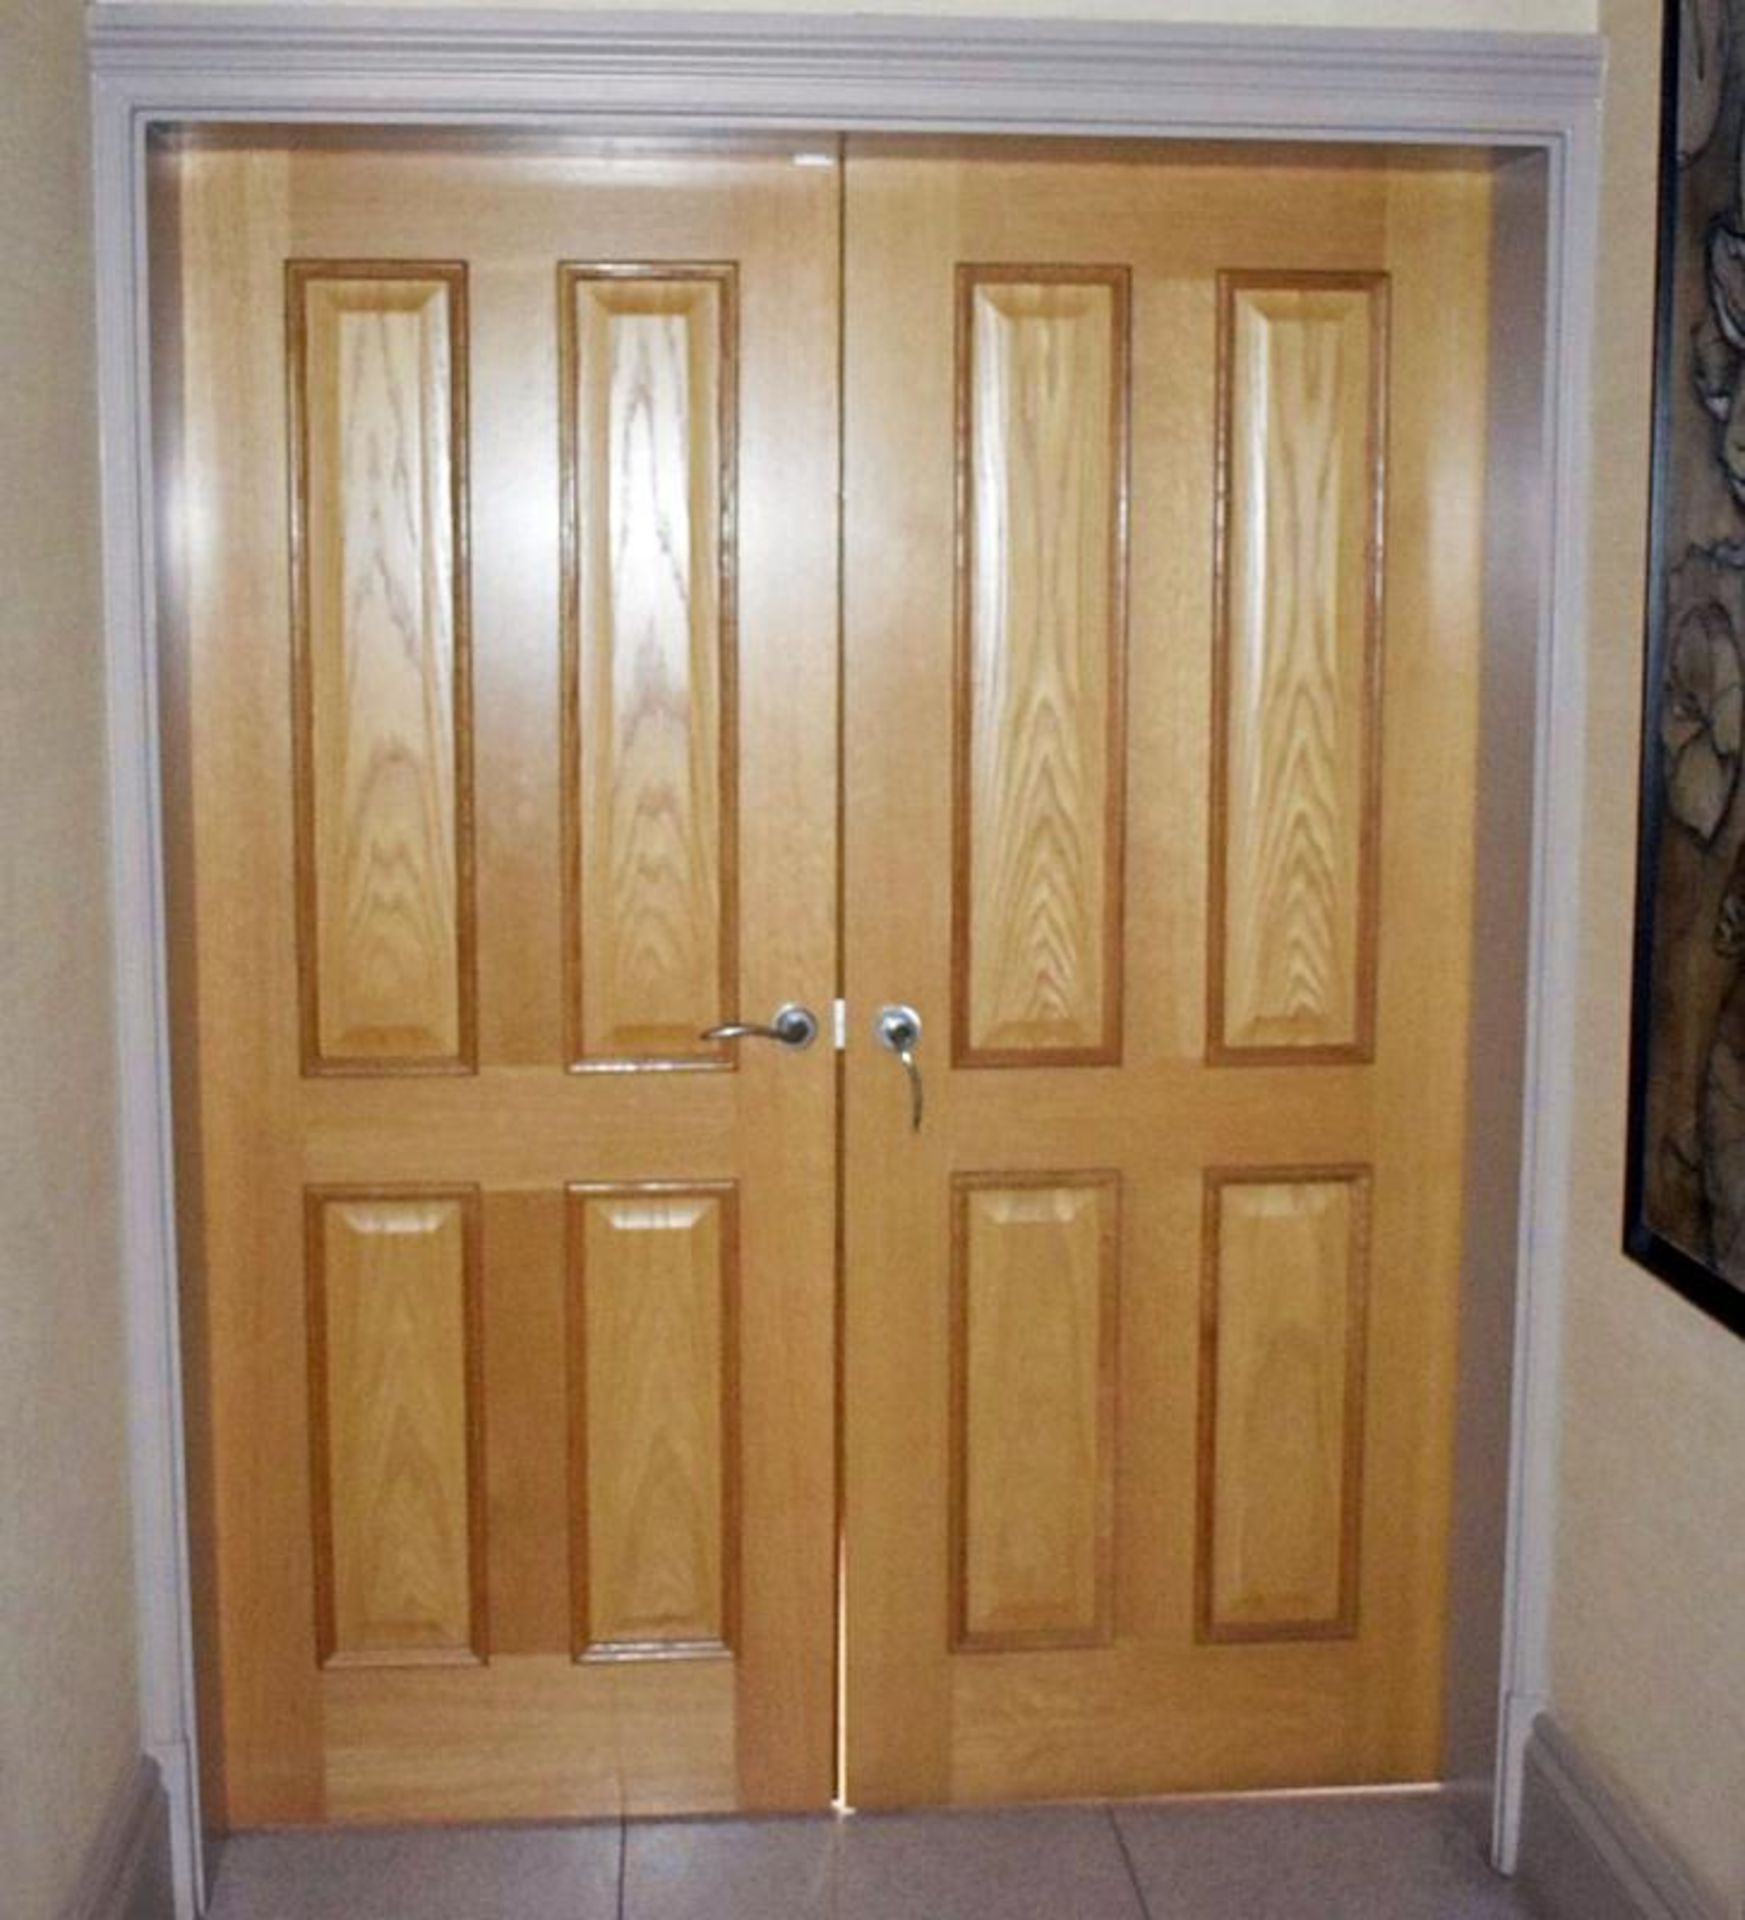 A Pair Of High Quality Internal Wooden Doors - Dimensions Of Each (approx): H200 x W75 x 7cm - Ref: - Image 2 of 3